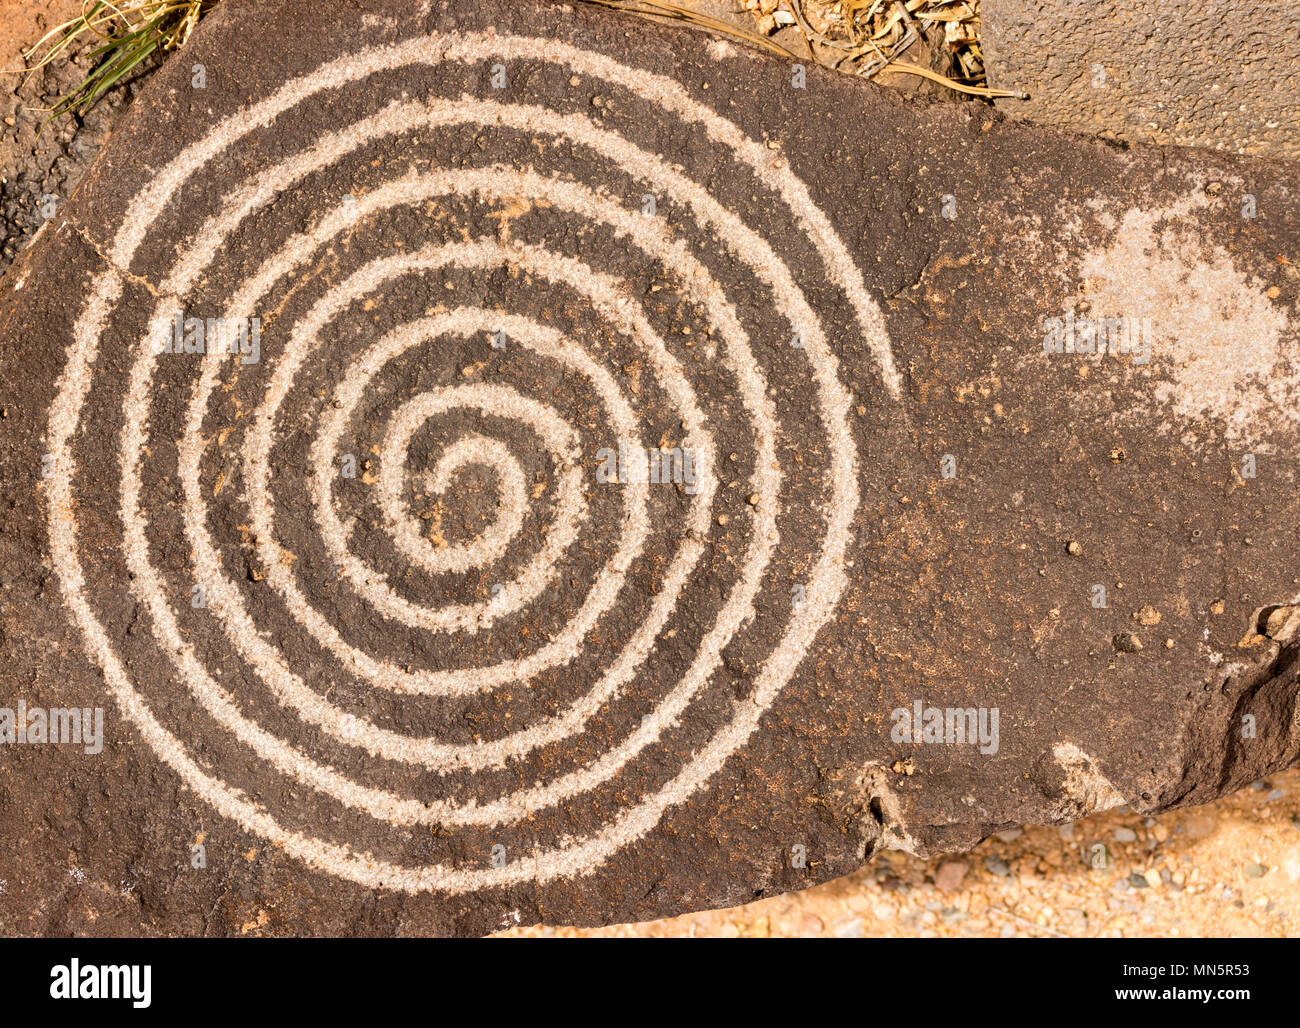 Spiral circle of life petroglyph. Ancient Pueblo etching located at Petroglyph National Monument, Albuquerque, New Mexico. Stock Photo